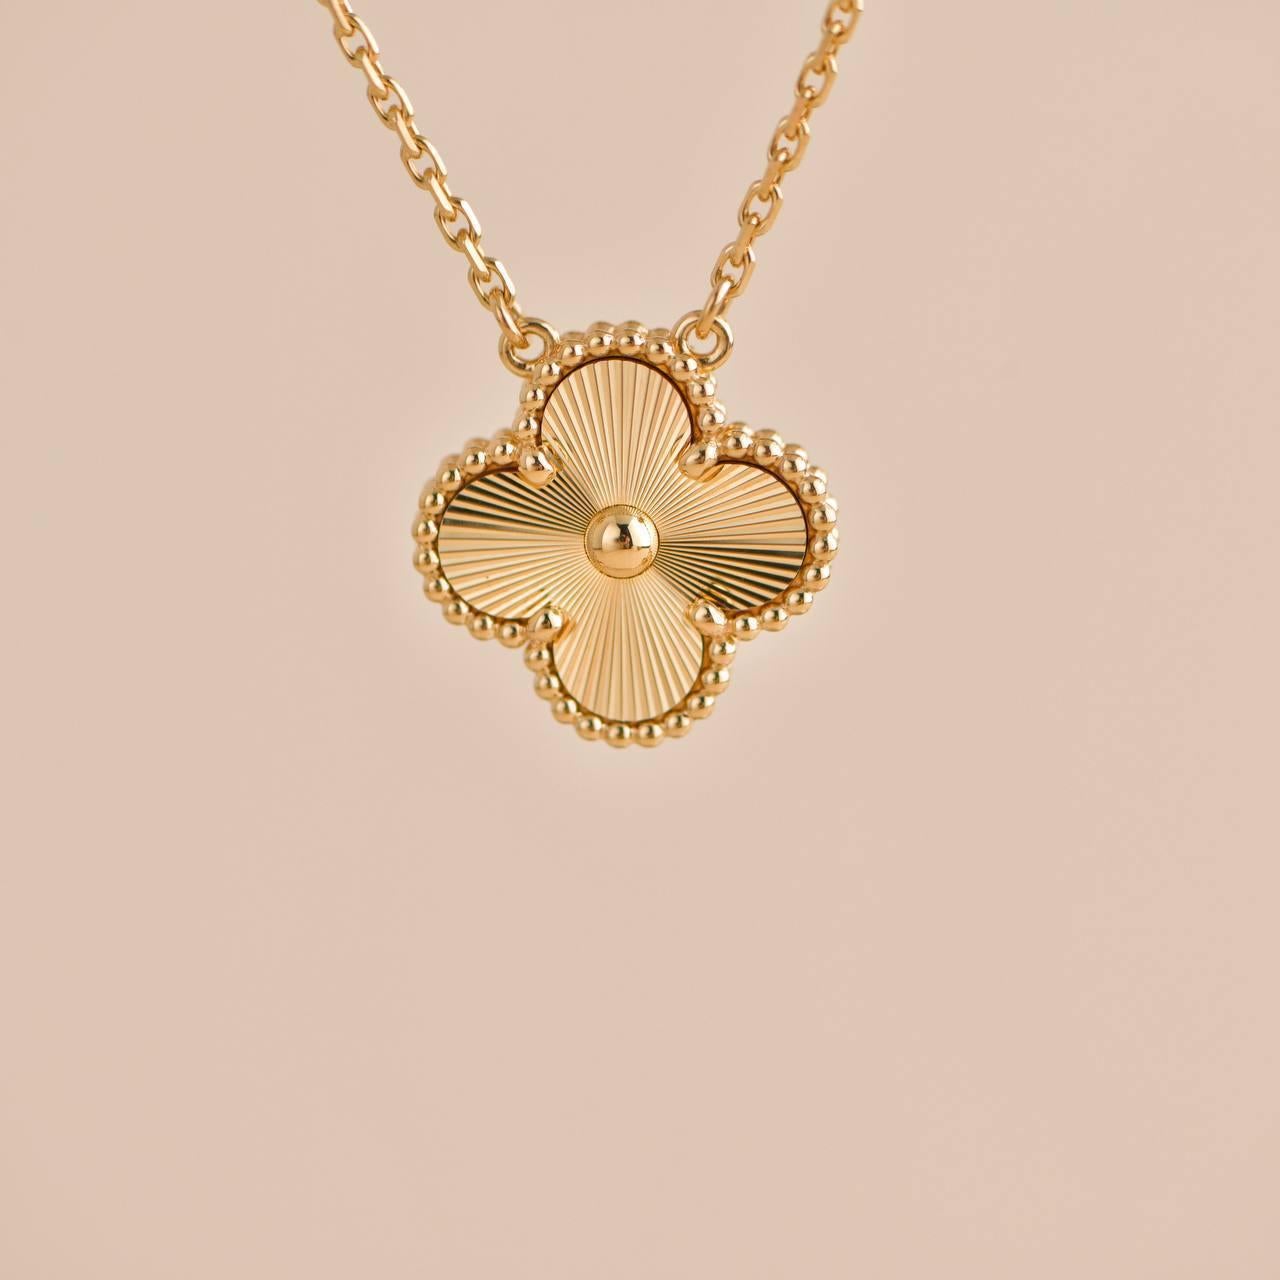 Van Cleef & Arpels Vintage Alhambra Guilloché 18K yellow gold Pendant Necklace In Excellent Condition For Sale In Banbury, GB